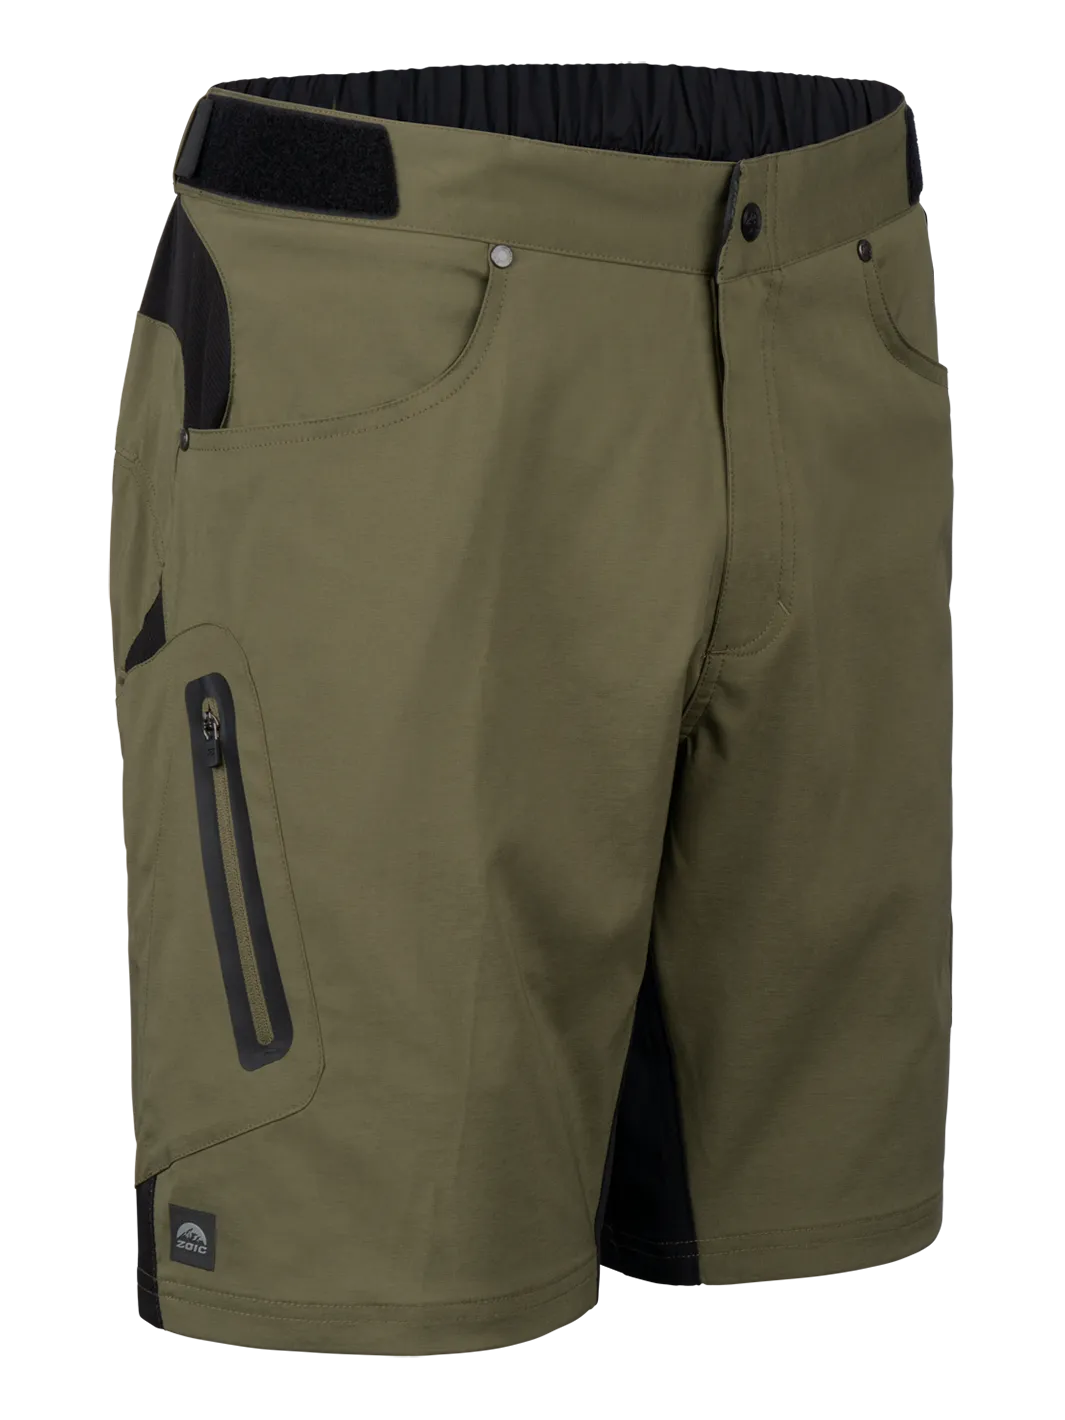 ZOIC | Ether 9 Shorts + Essential Liner – ZOIC Clothing